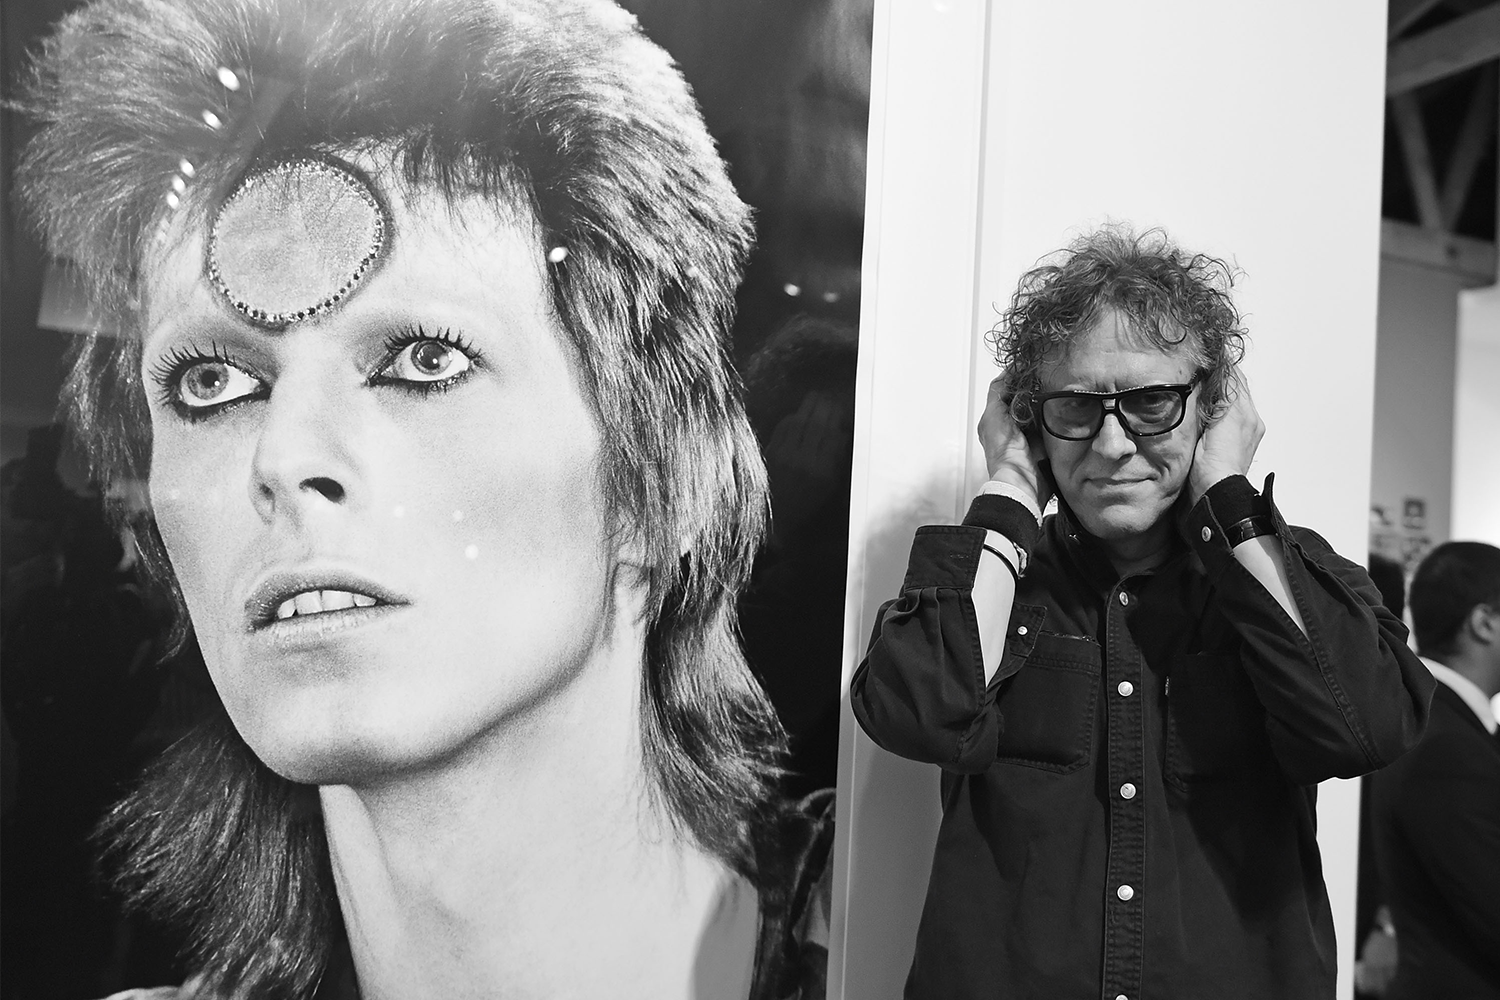 Mick Rock at the TASCHEN Gallery opening reception for "Mick Rock: Shooting For Stardust - The Rise Of David Bowie & Co."